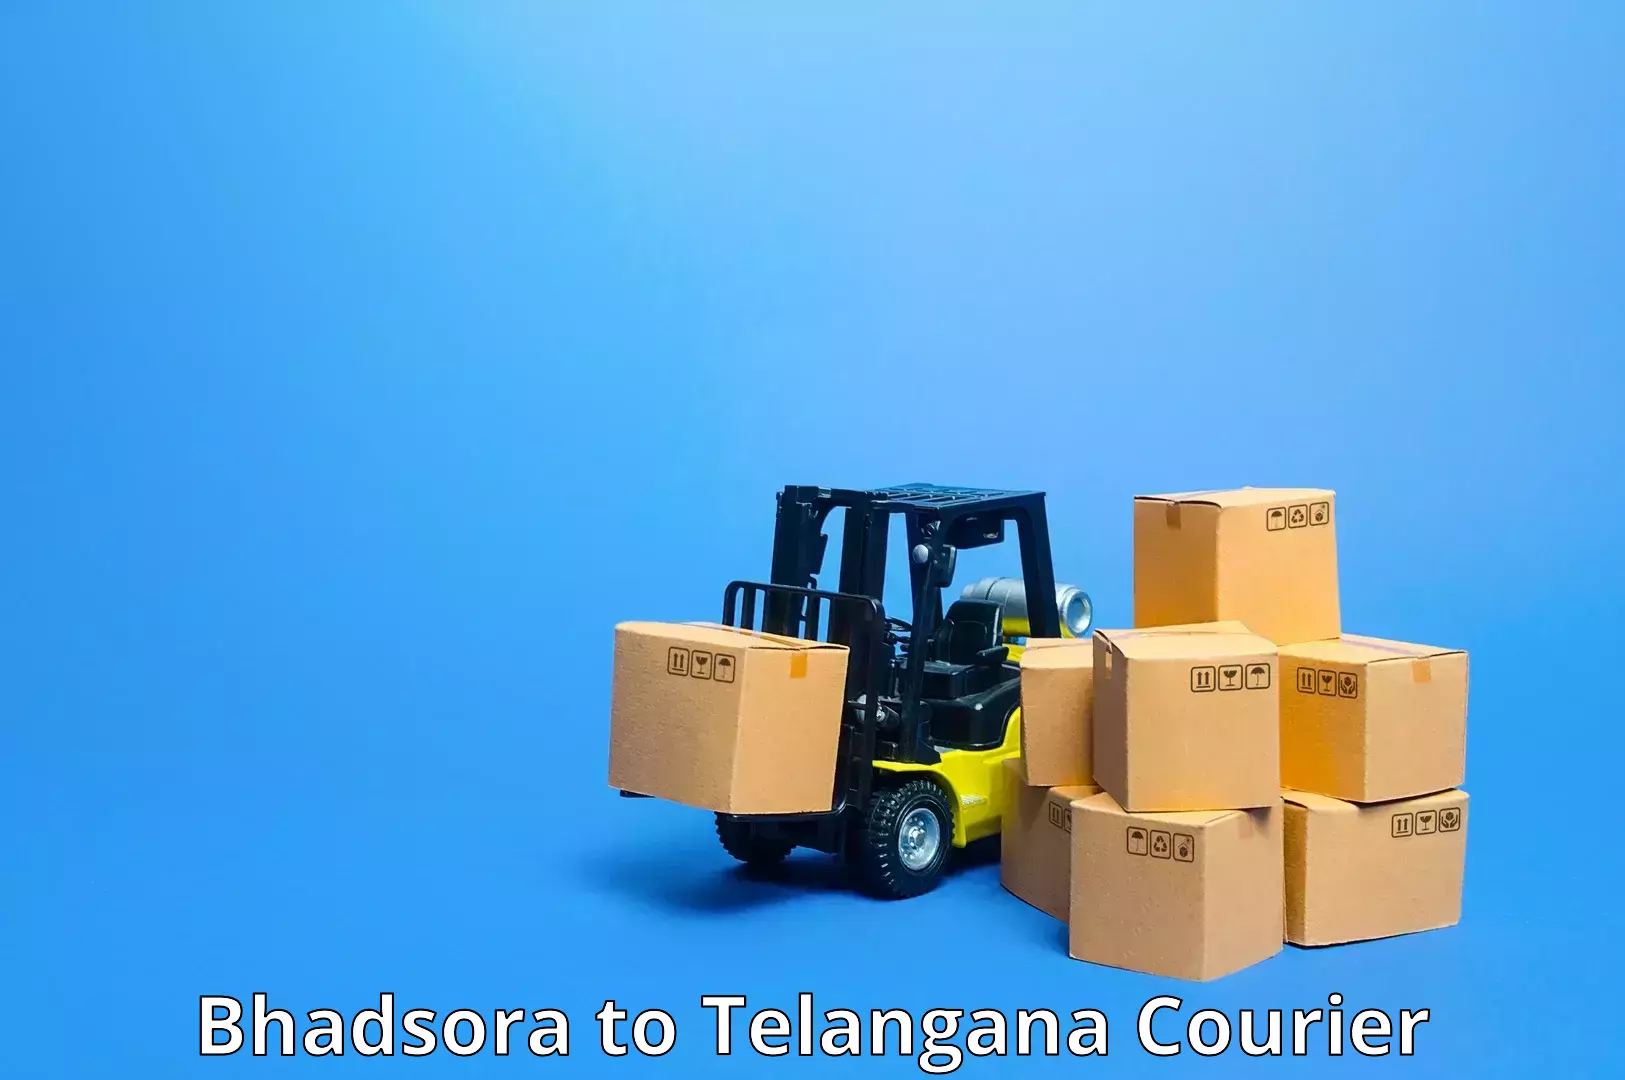 Courier service efficiency Bhadsora to Netrang